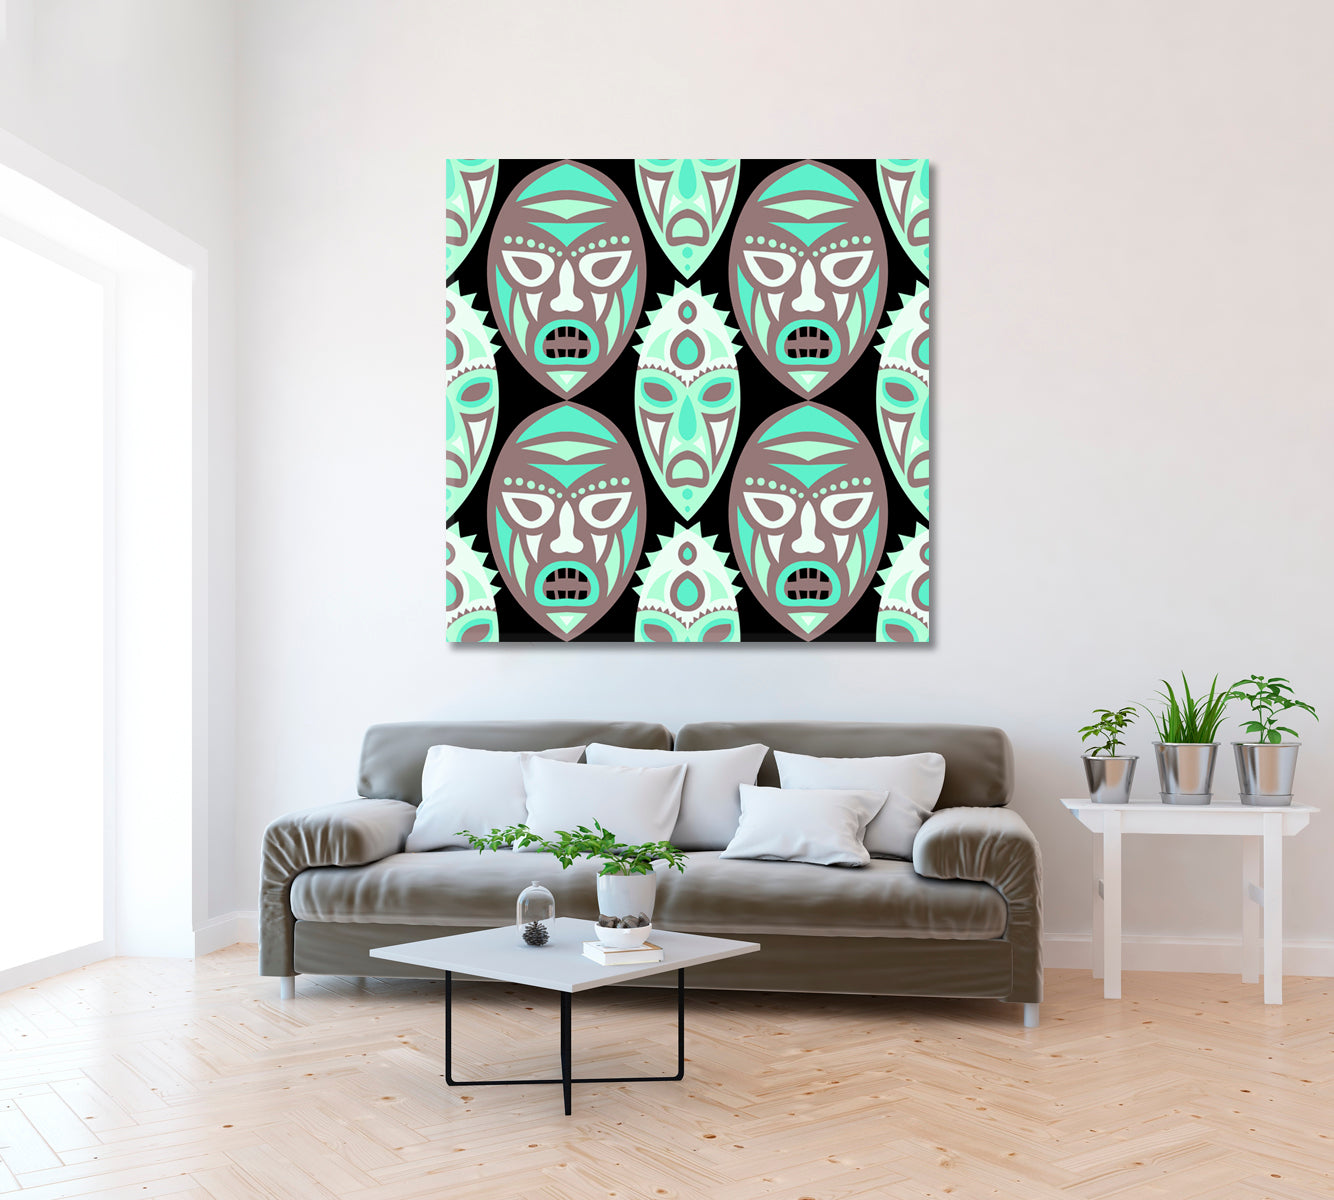 African Ethnic Tribal Abstract Faces Canvas Print ArtLexy 1 Panel 12"x12" inches 